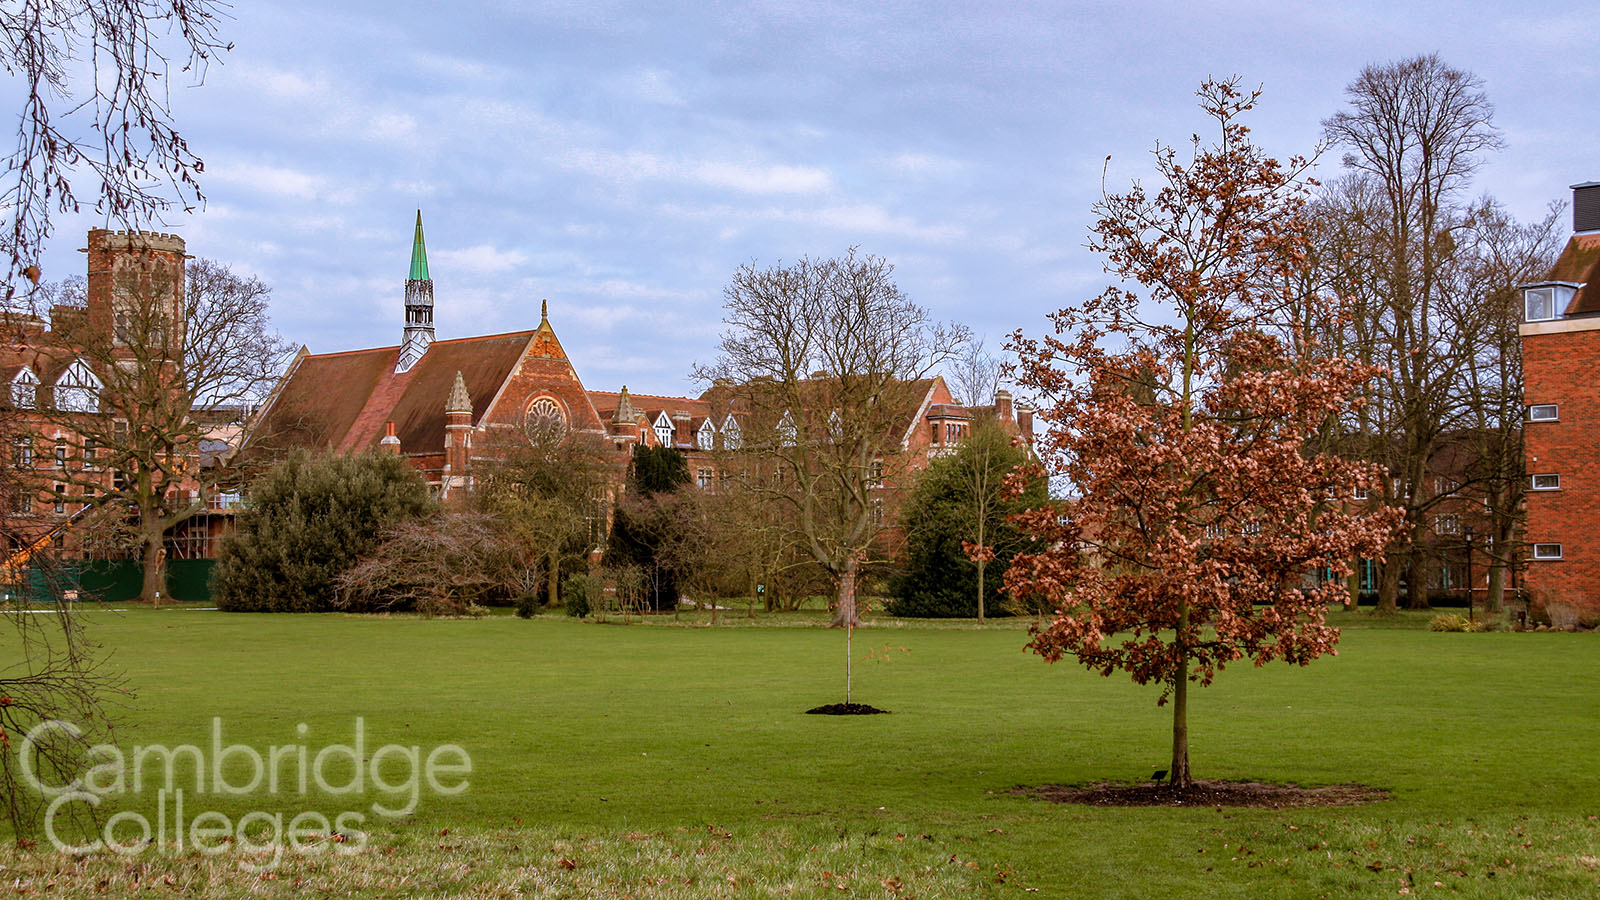 The grounds and older buildings of Homerton college